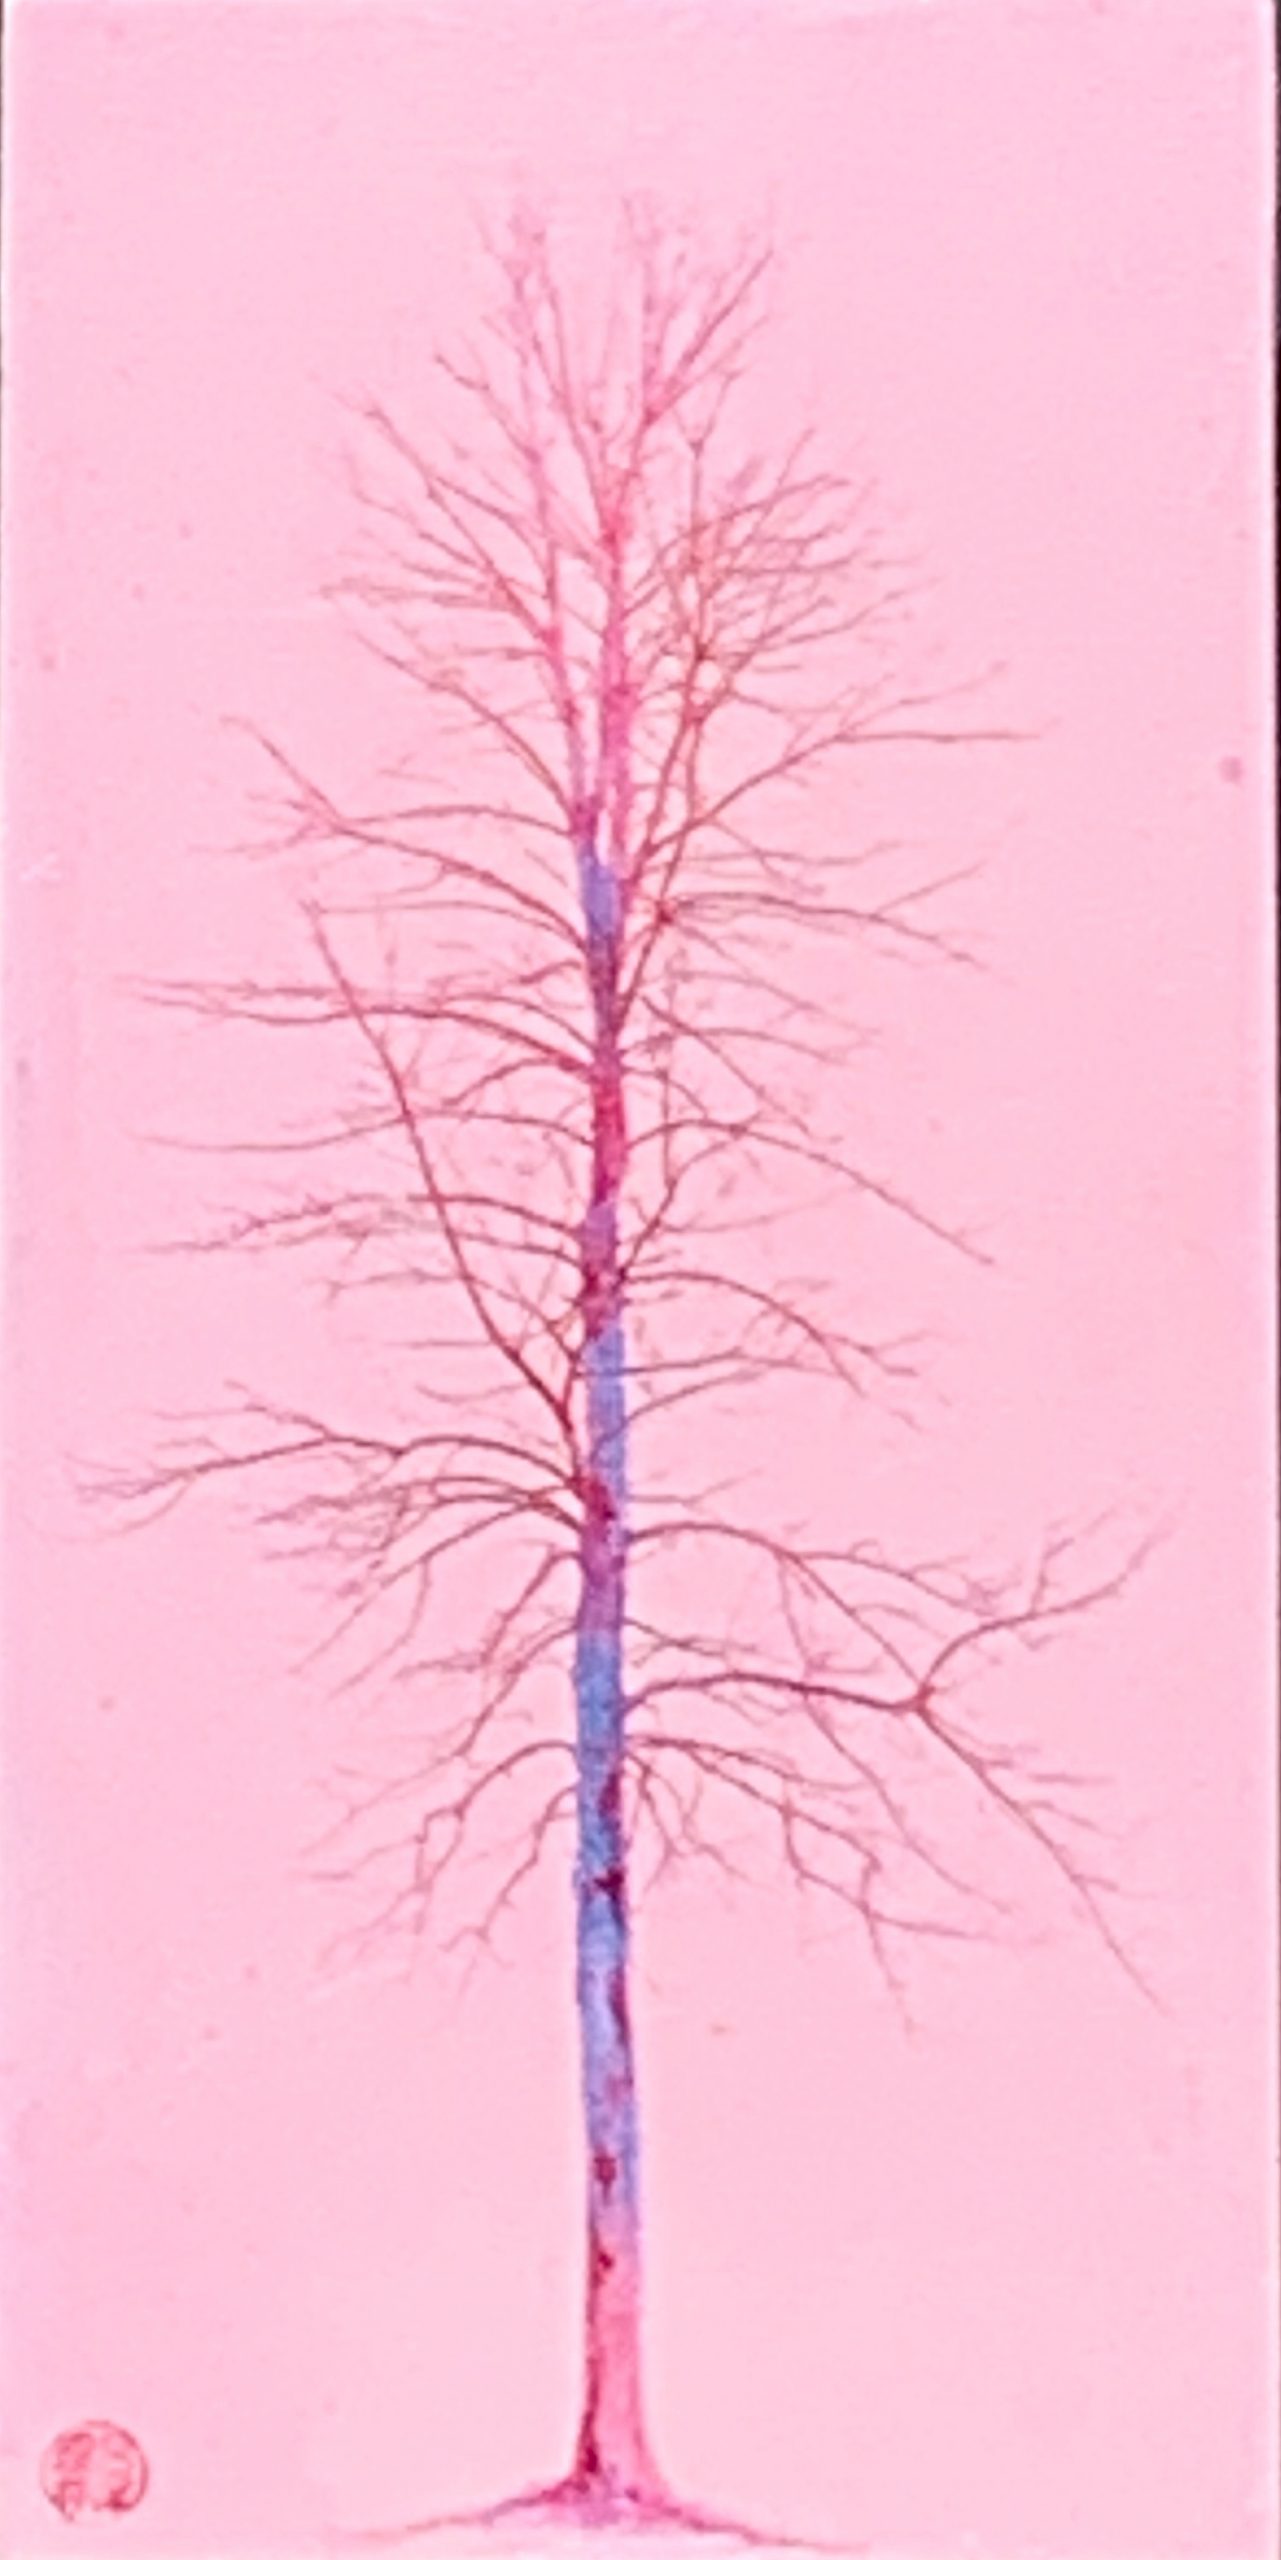 Solitaire Pink, mixed media tree painting by Lori Bagneres | Effusion Art Gallery + Cast Glass Studio, Invermere BC